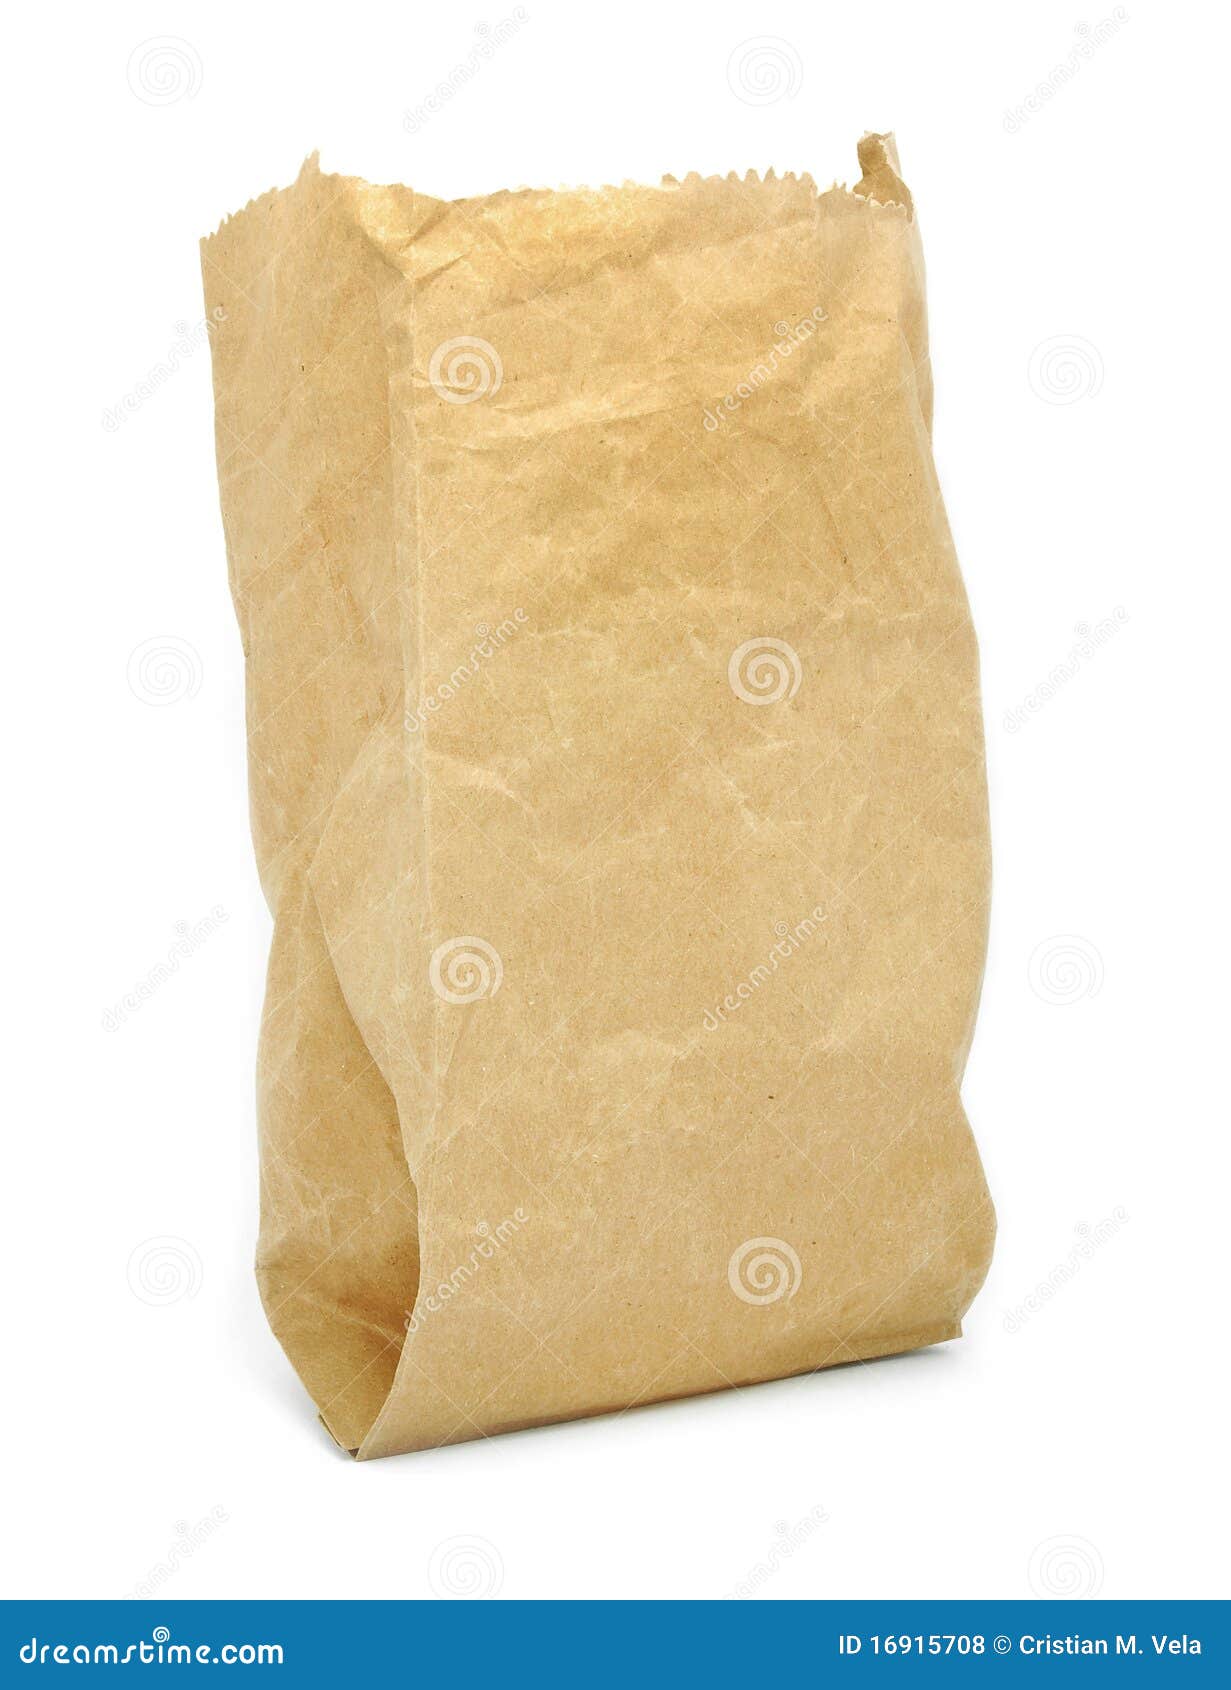 Paper bag stock photo. Image of recycled, sack, ecological - 16915708